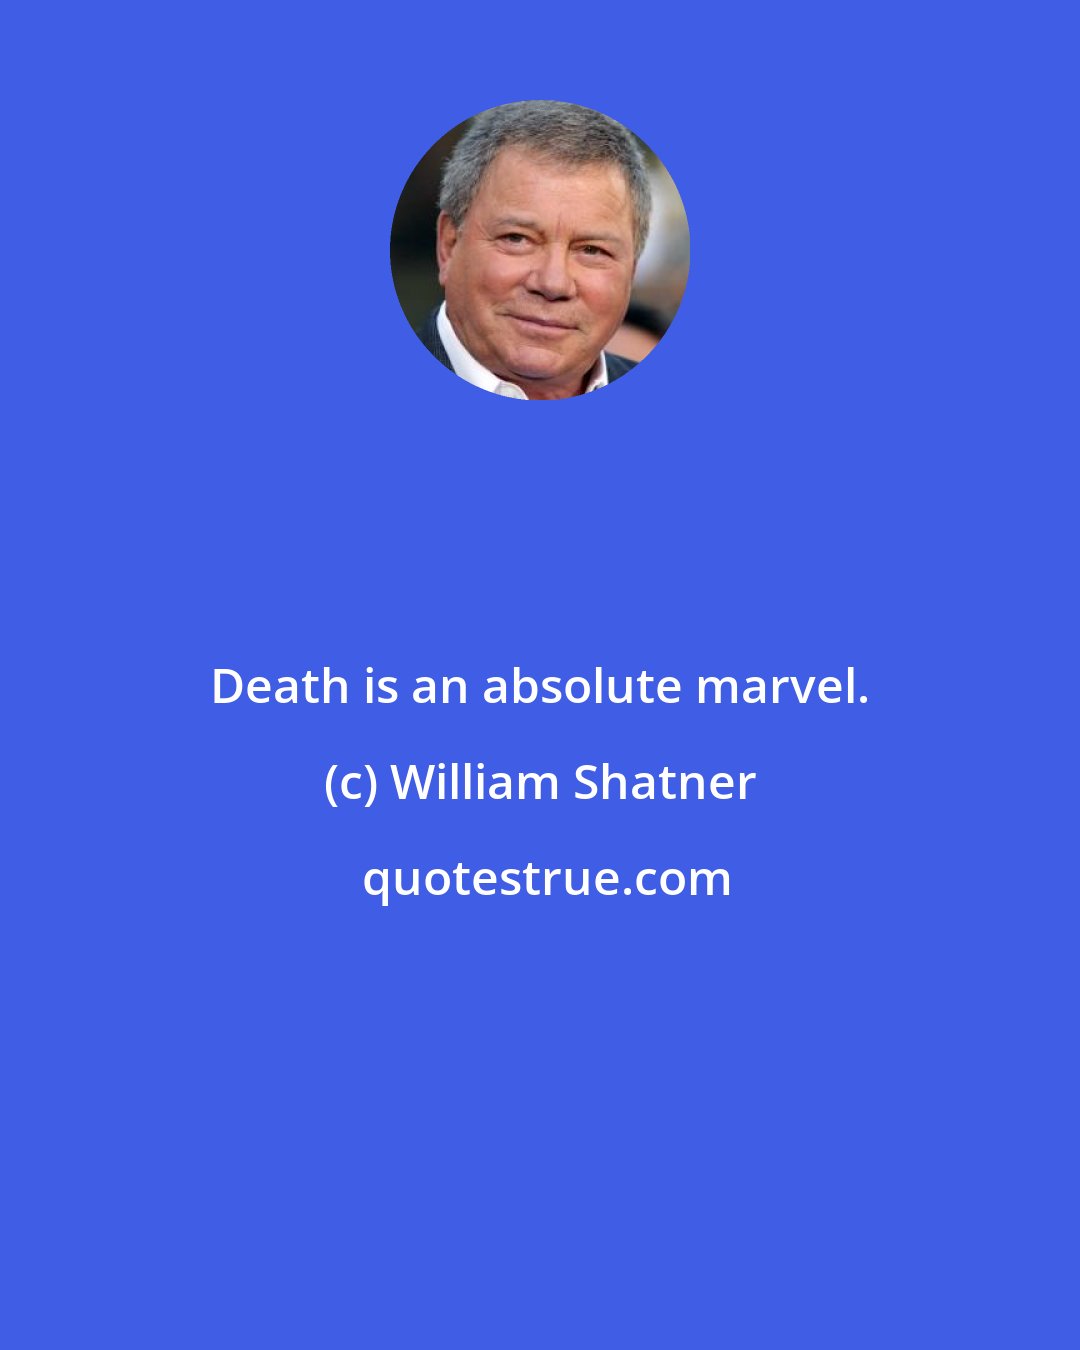 William Shatner: Death is an absolute marvel.